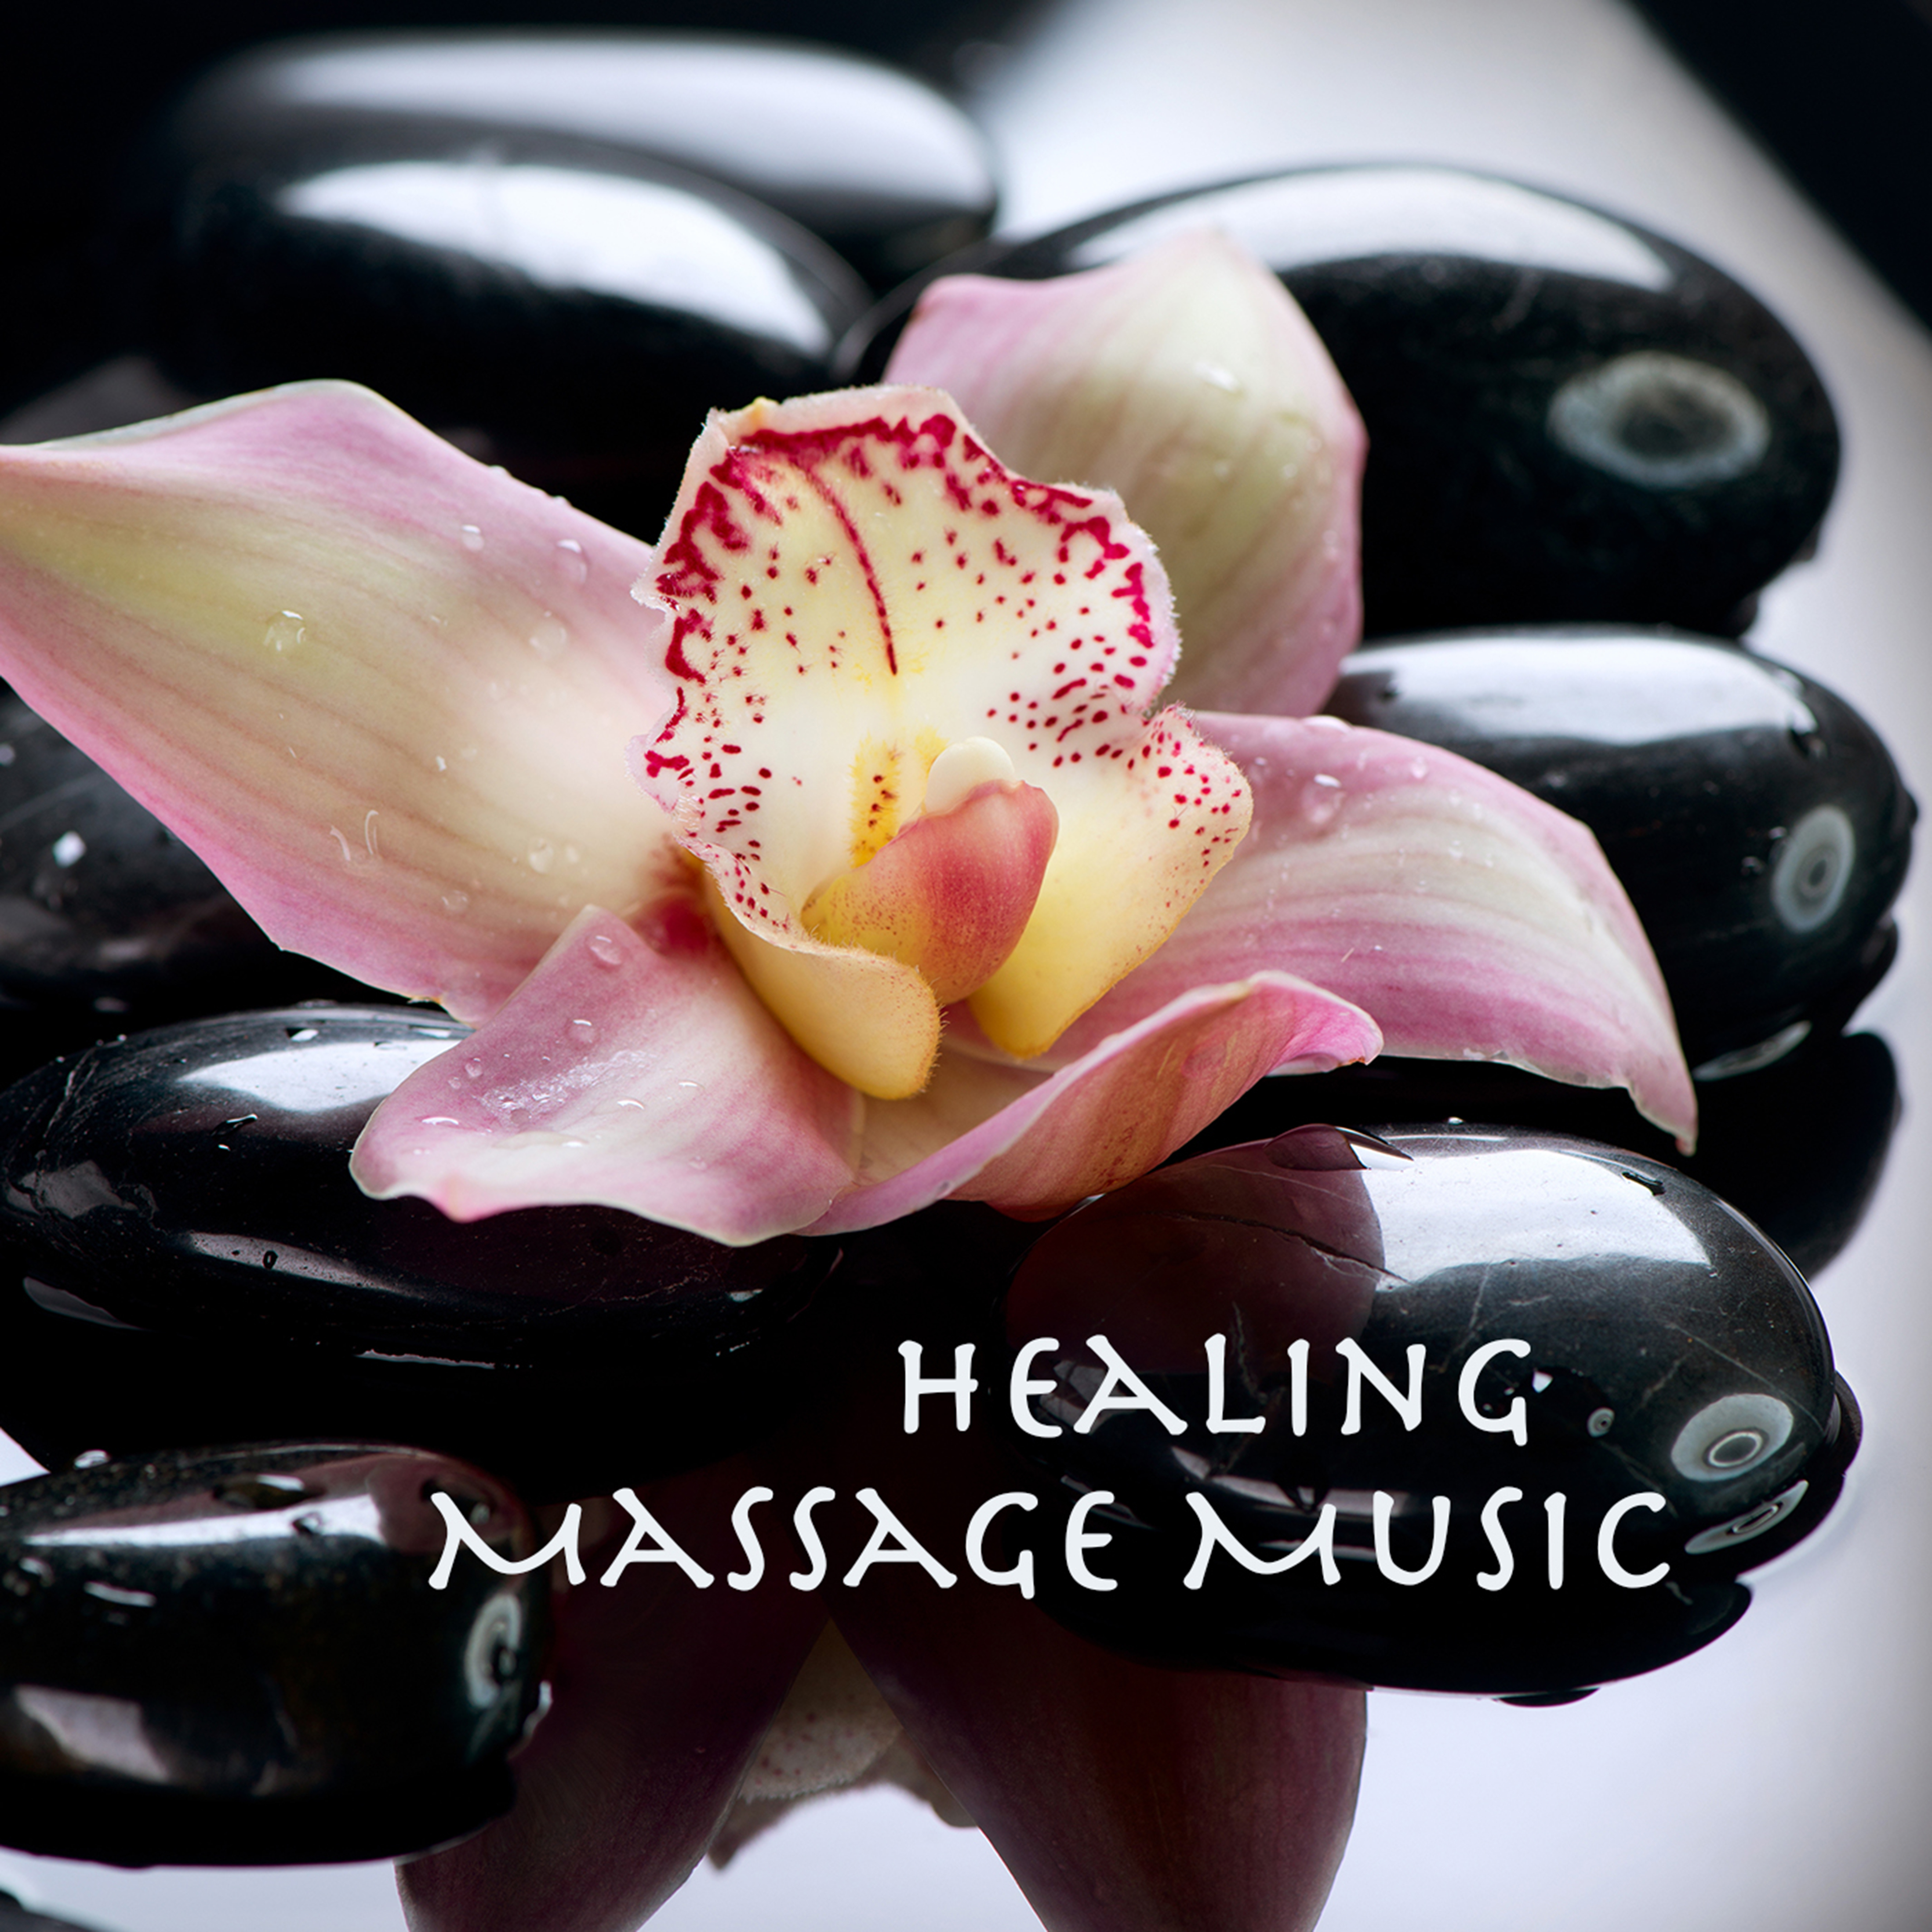 Healing Massage Music: Most Relaxing New Age Spa Music, Ideal for Deep Relaxation, Sleep and Mind Body Connection In Peace